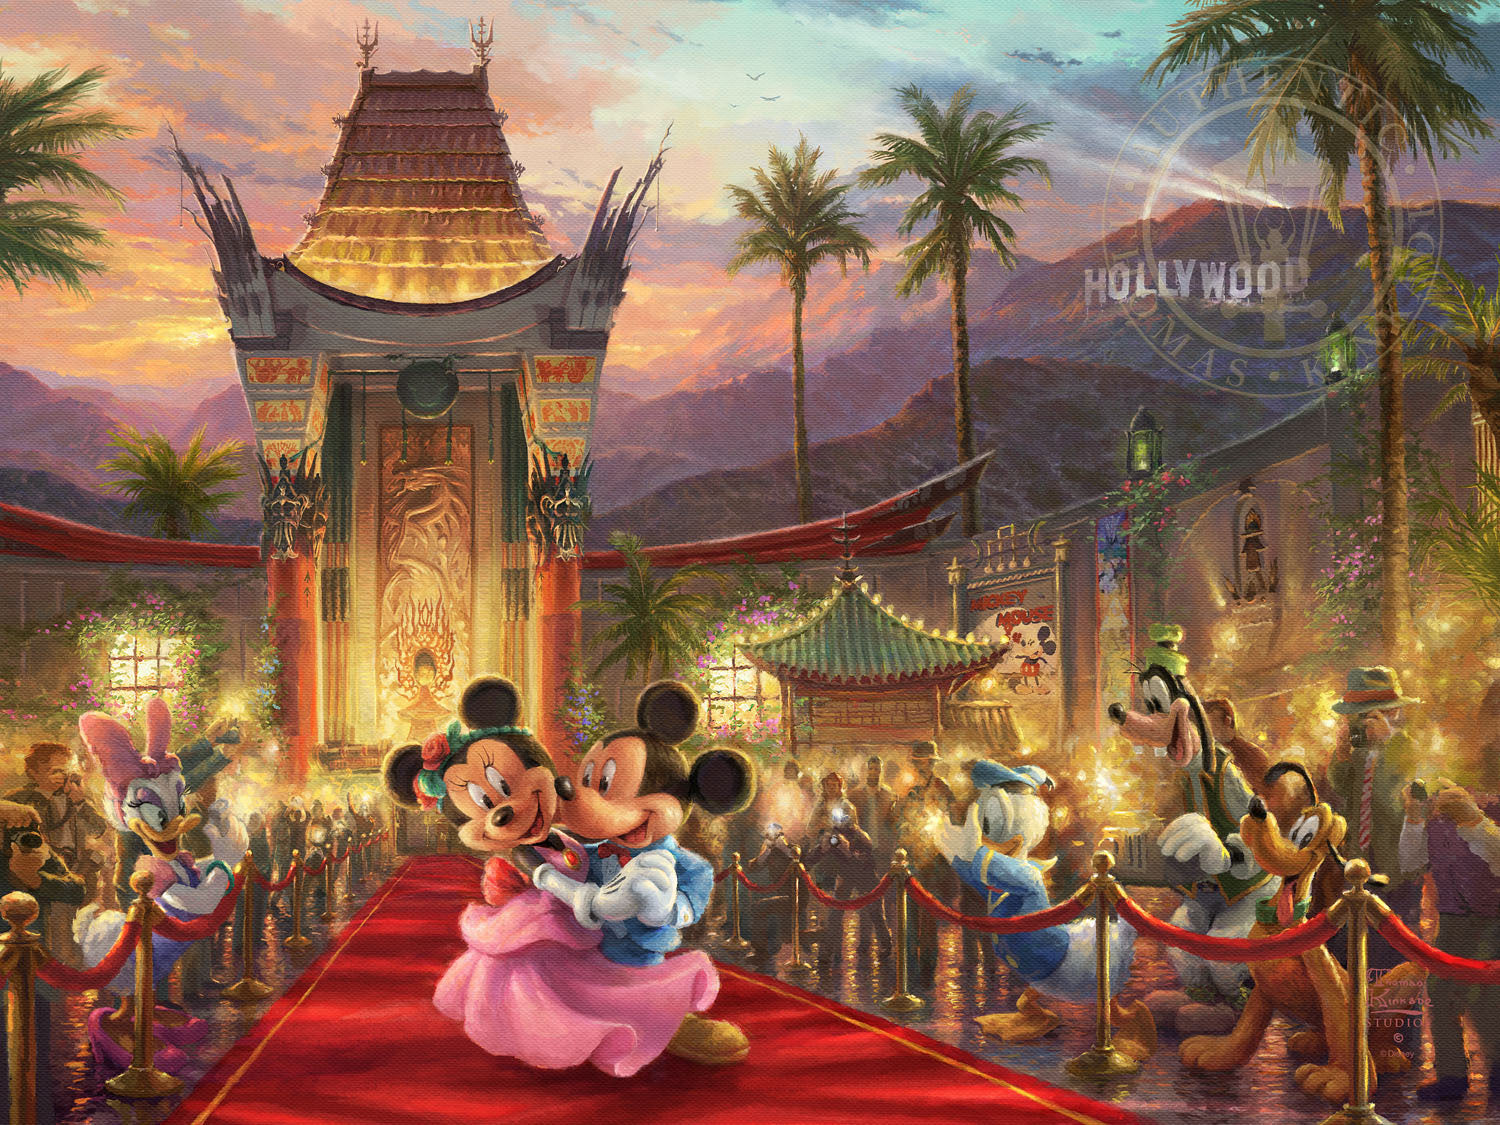 Thomas Kinkade Studios "Mickey and Minnie in Hollywood" Limited and Open Canvas Giclee